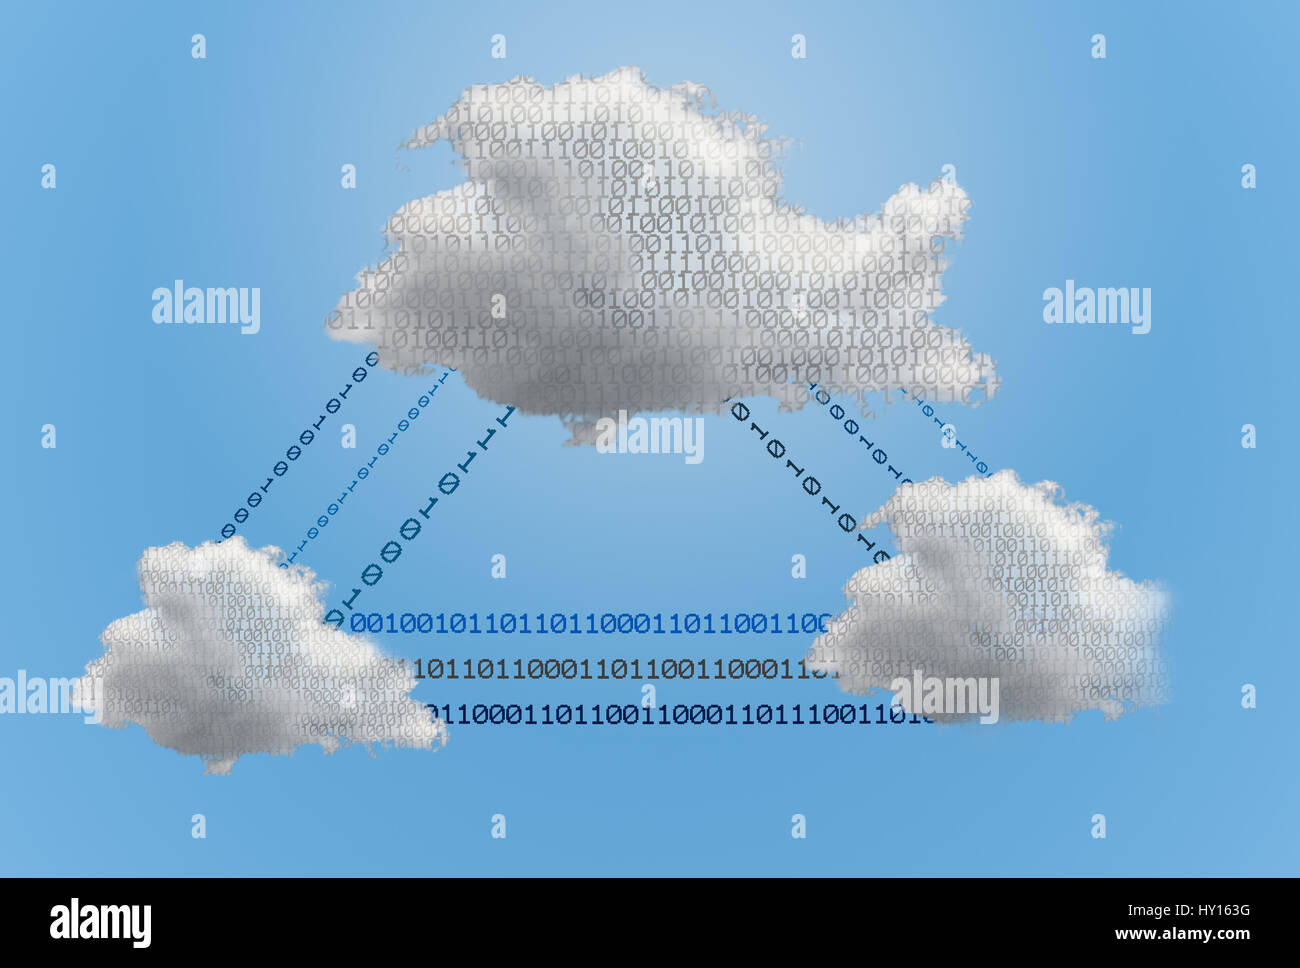 Tech concept - cloud computing network and online applications showing a digital cloud network interconnected by data streams Stock Photo